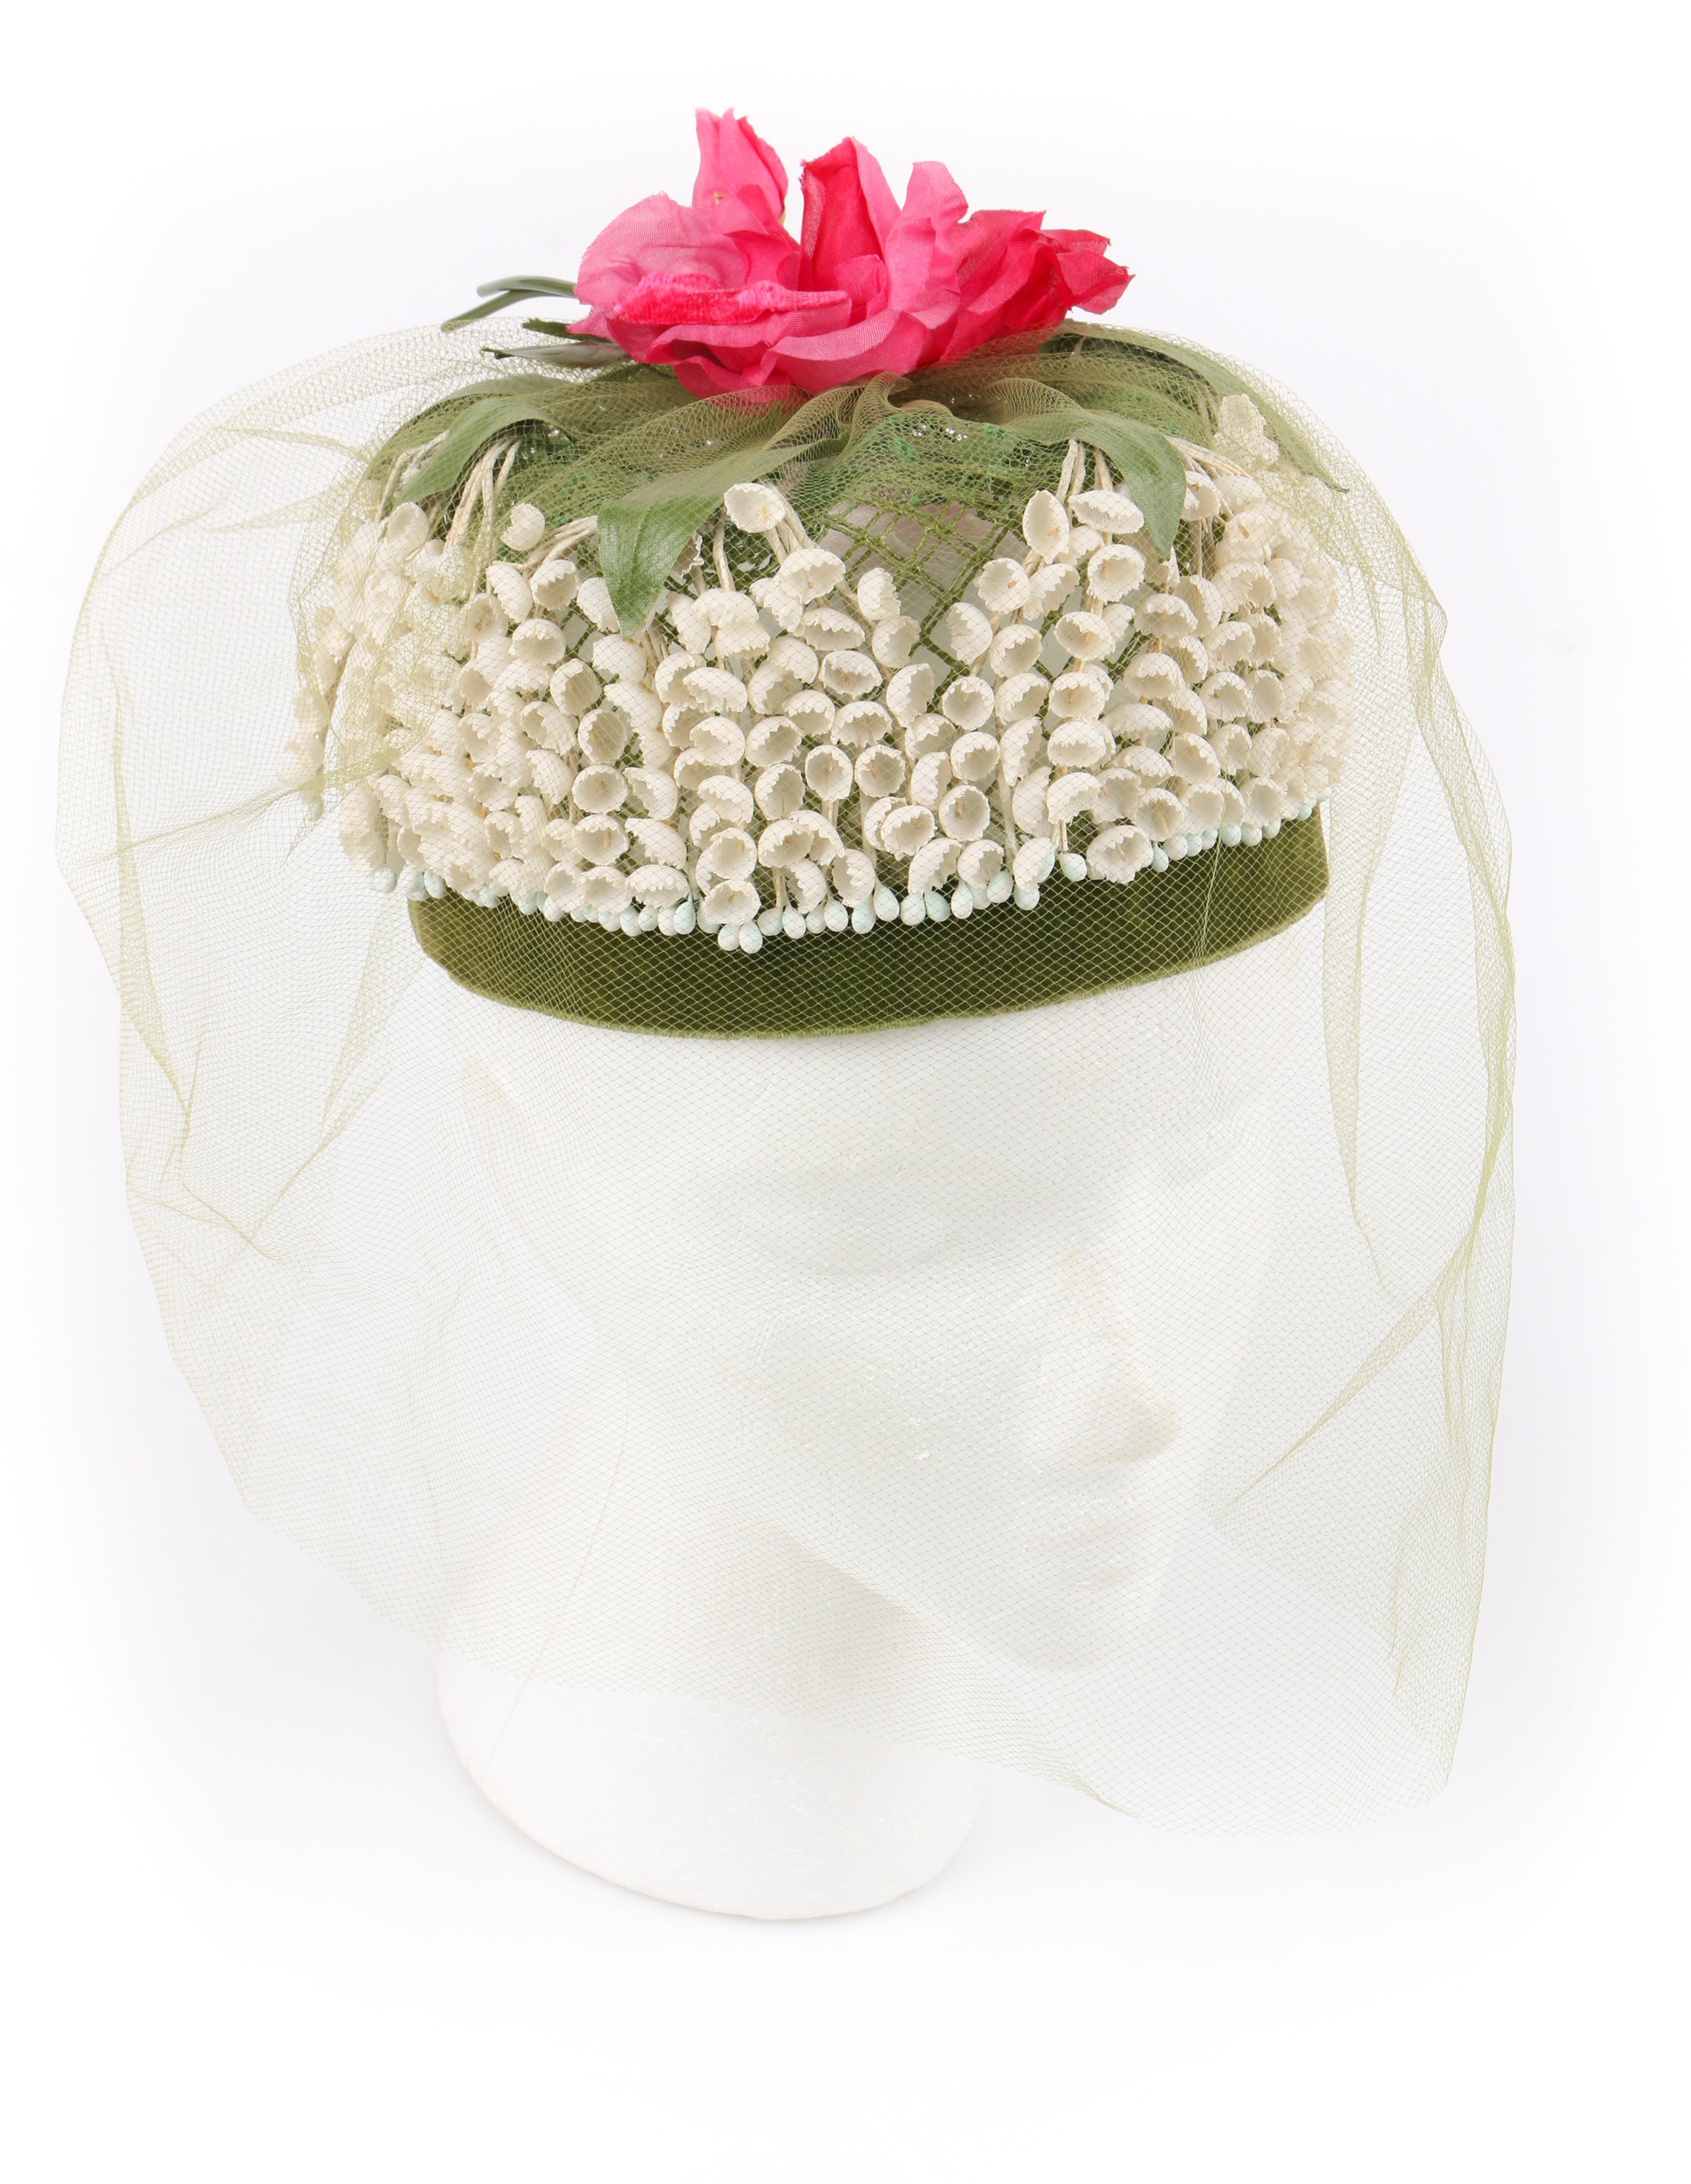 DESCRIPTION: MISS FEIGE c.1960's Lily of the Valley Veiled Floral Garden Party Pillbox Hat
 
Circa: c.1960’s
Label(s): Styled by Miss Feige; Union Label
Designer: 
Style: Pillbox
Color(s): Shades of gree, off white, and pink
Lined: No 
Marked Fabric